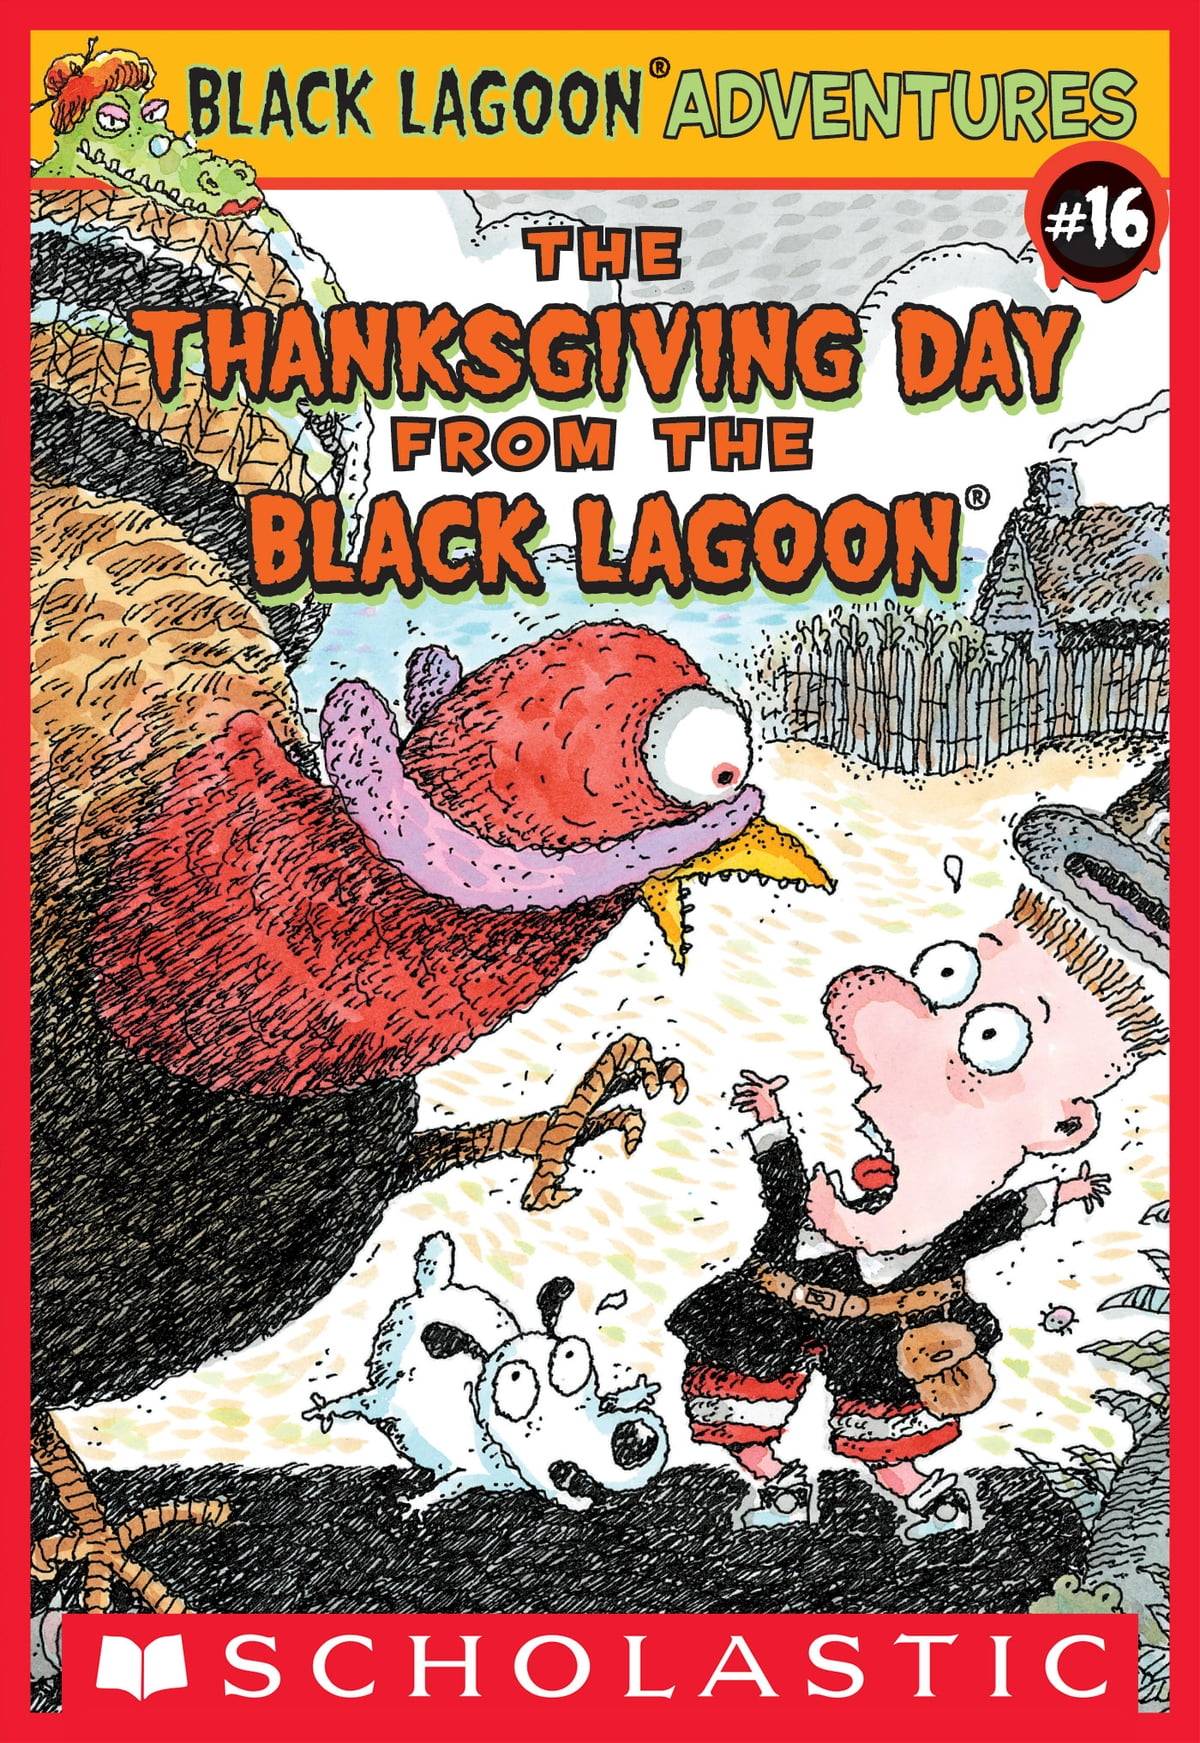 IMG : Black Lagoon Adventures The Thanksgiving Day from the Black Lagoon